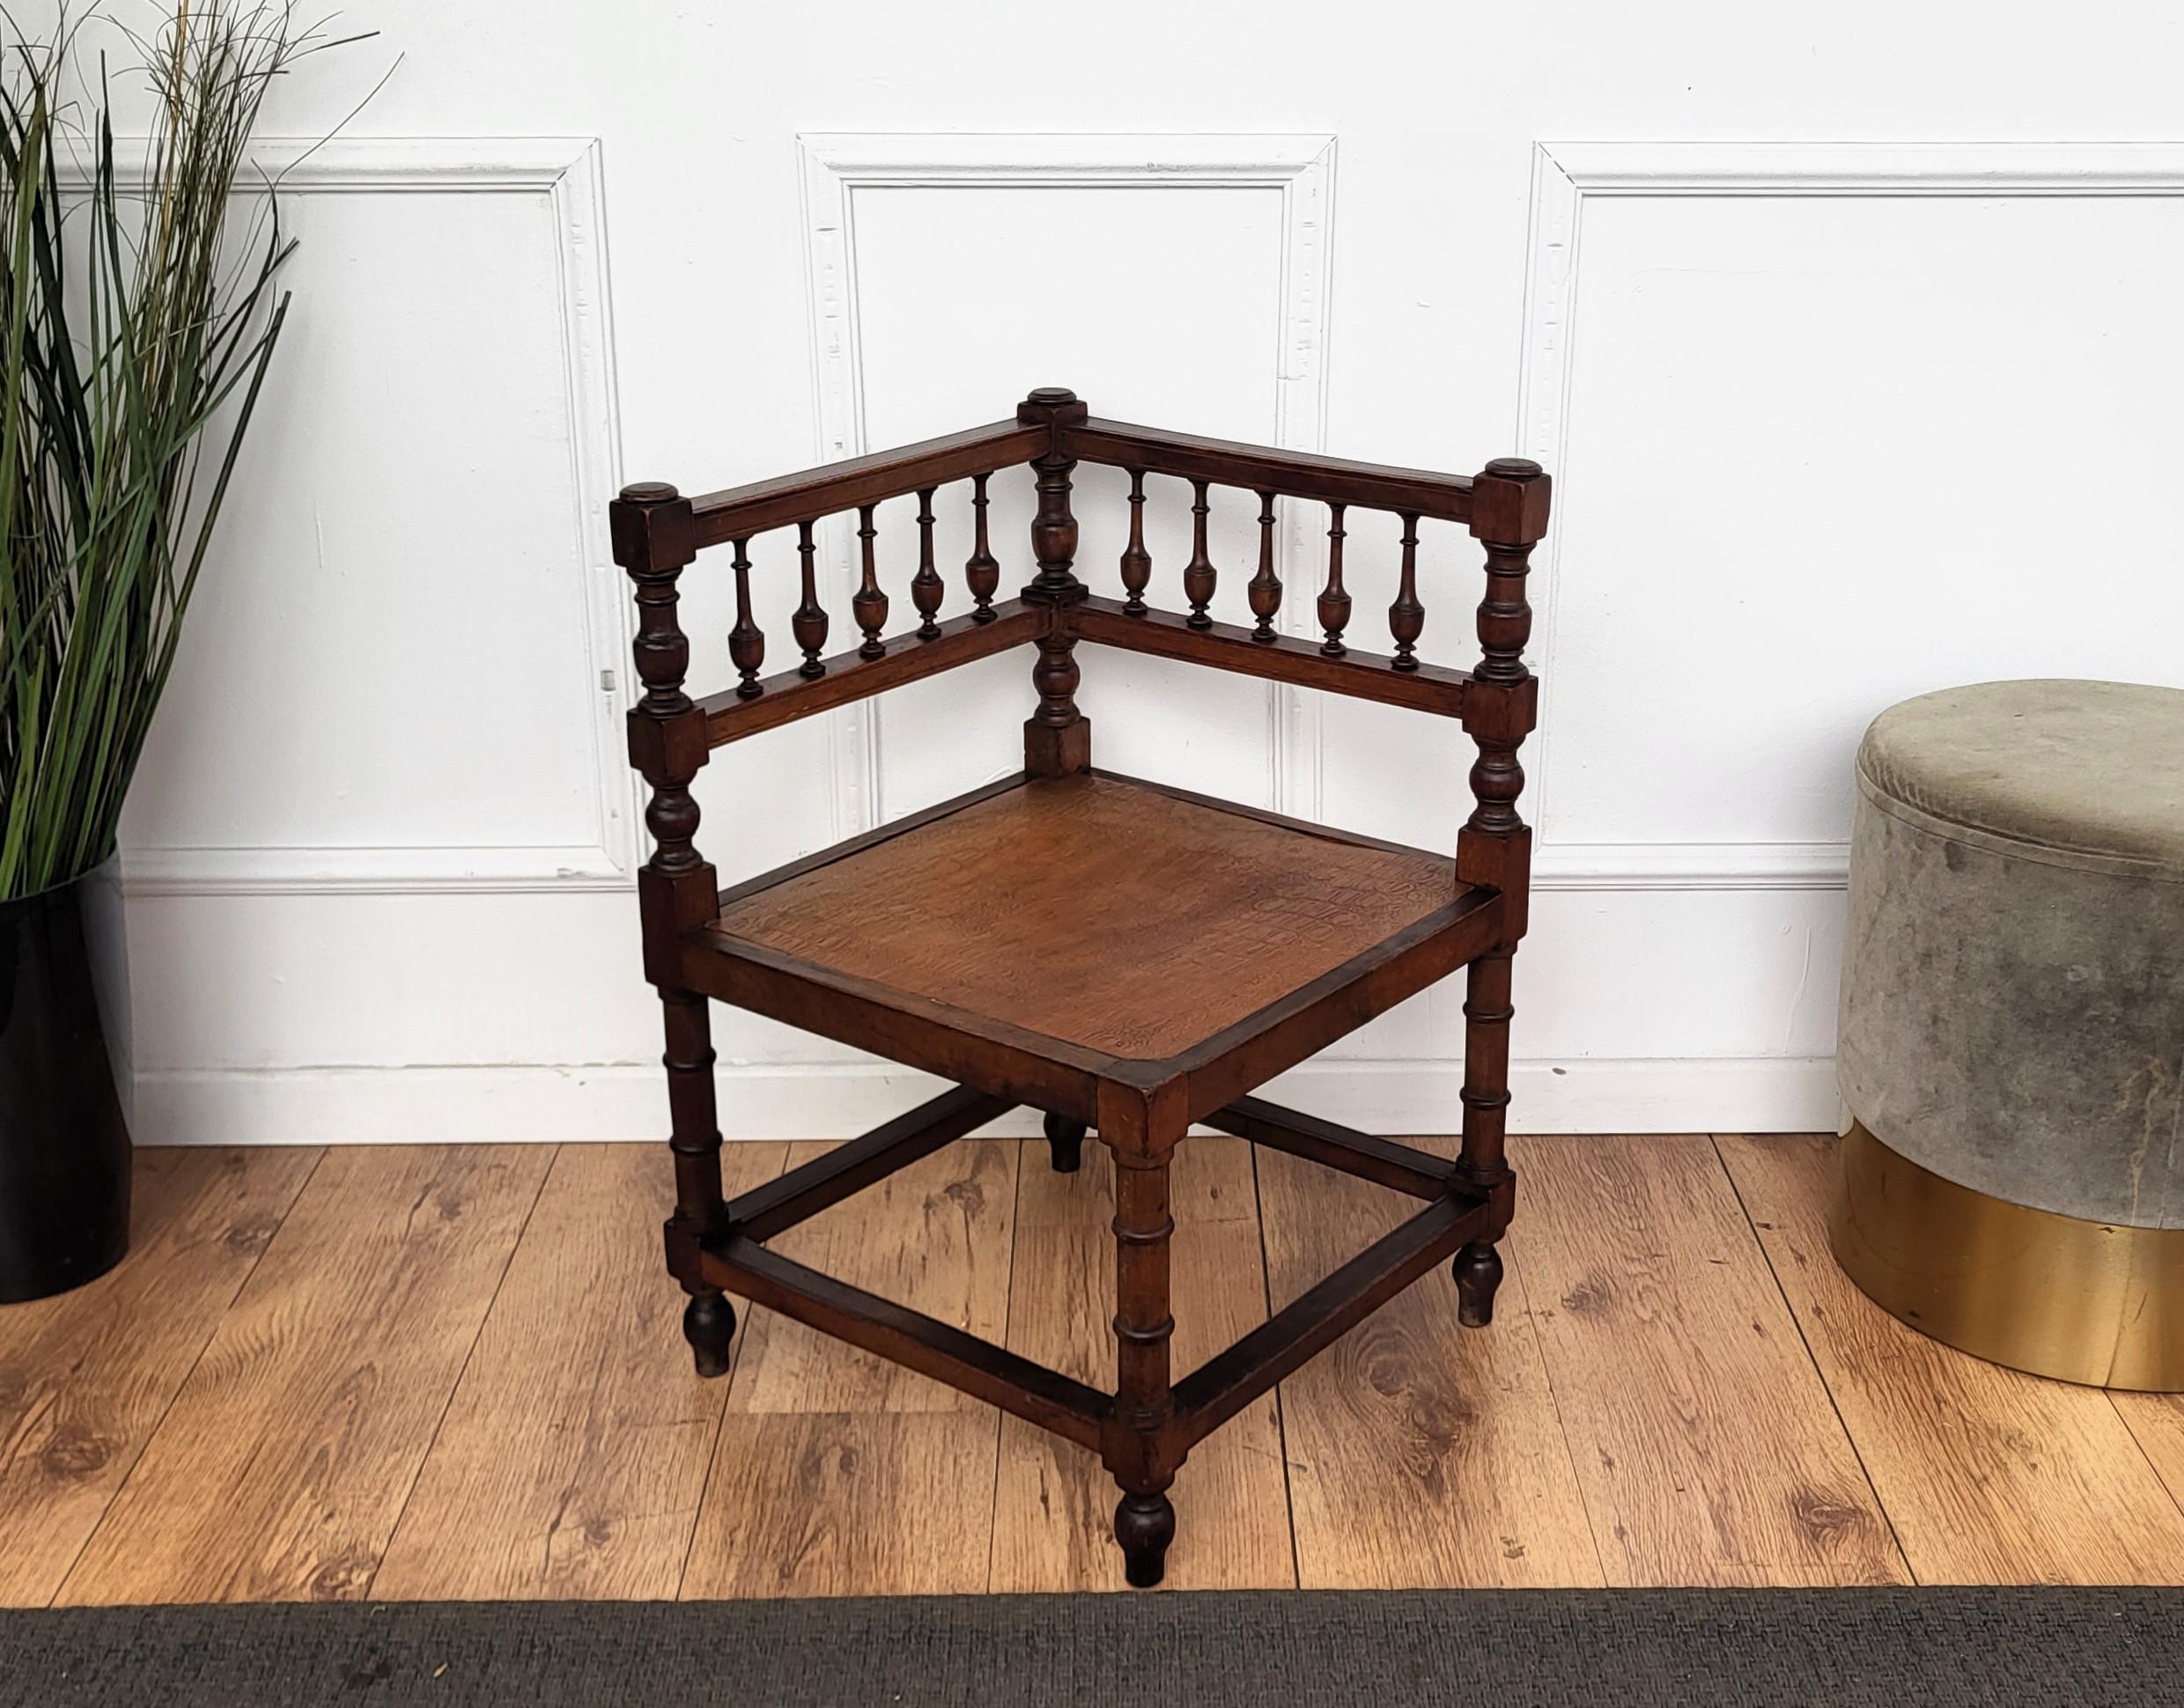 A very charming and besutifully carved and crafted wood corner chair with its aligator shaped seat. 